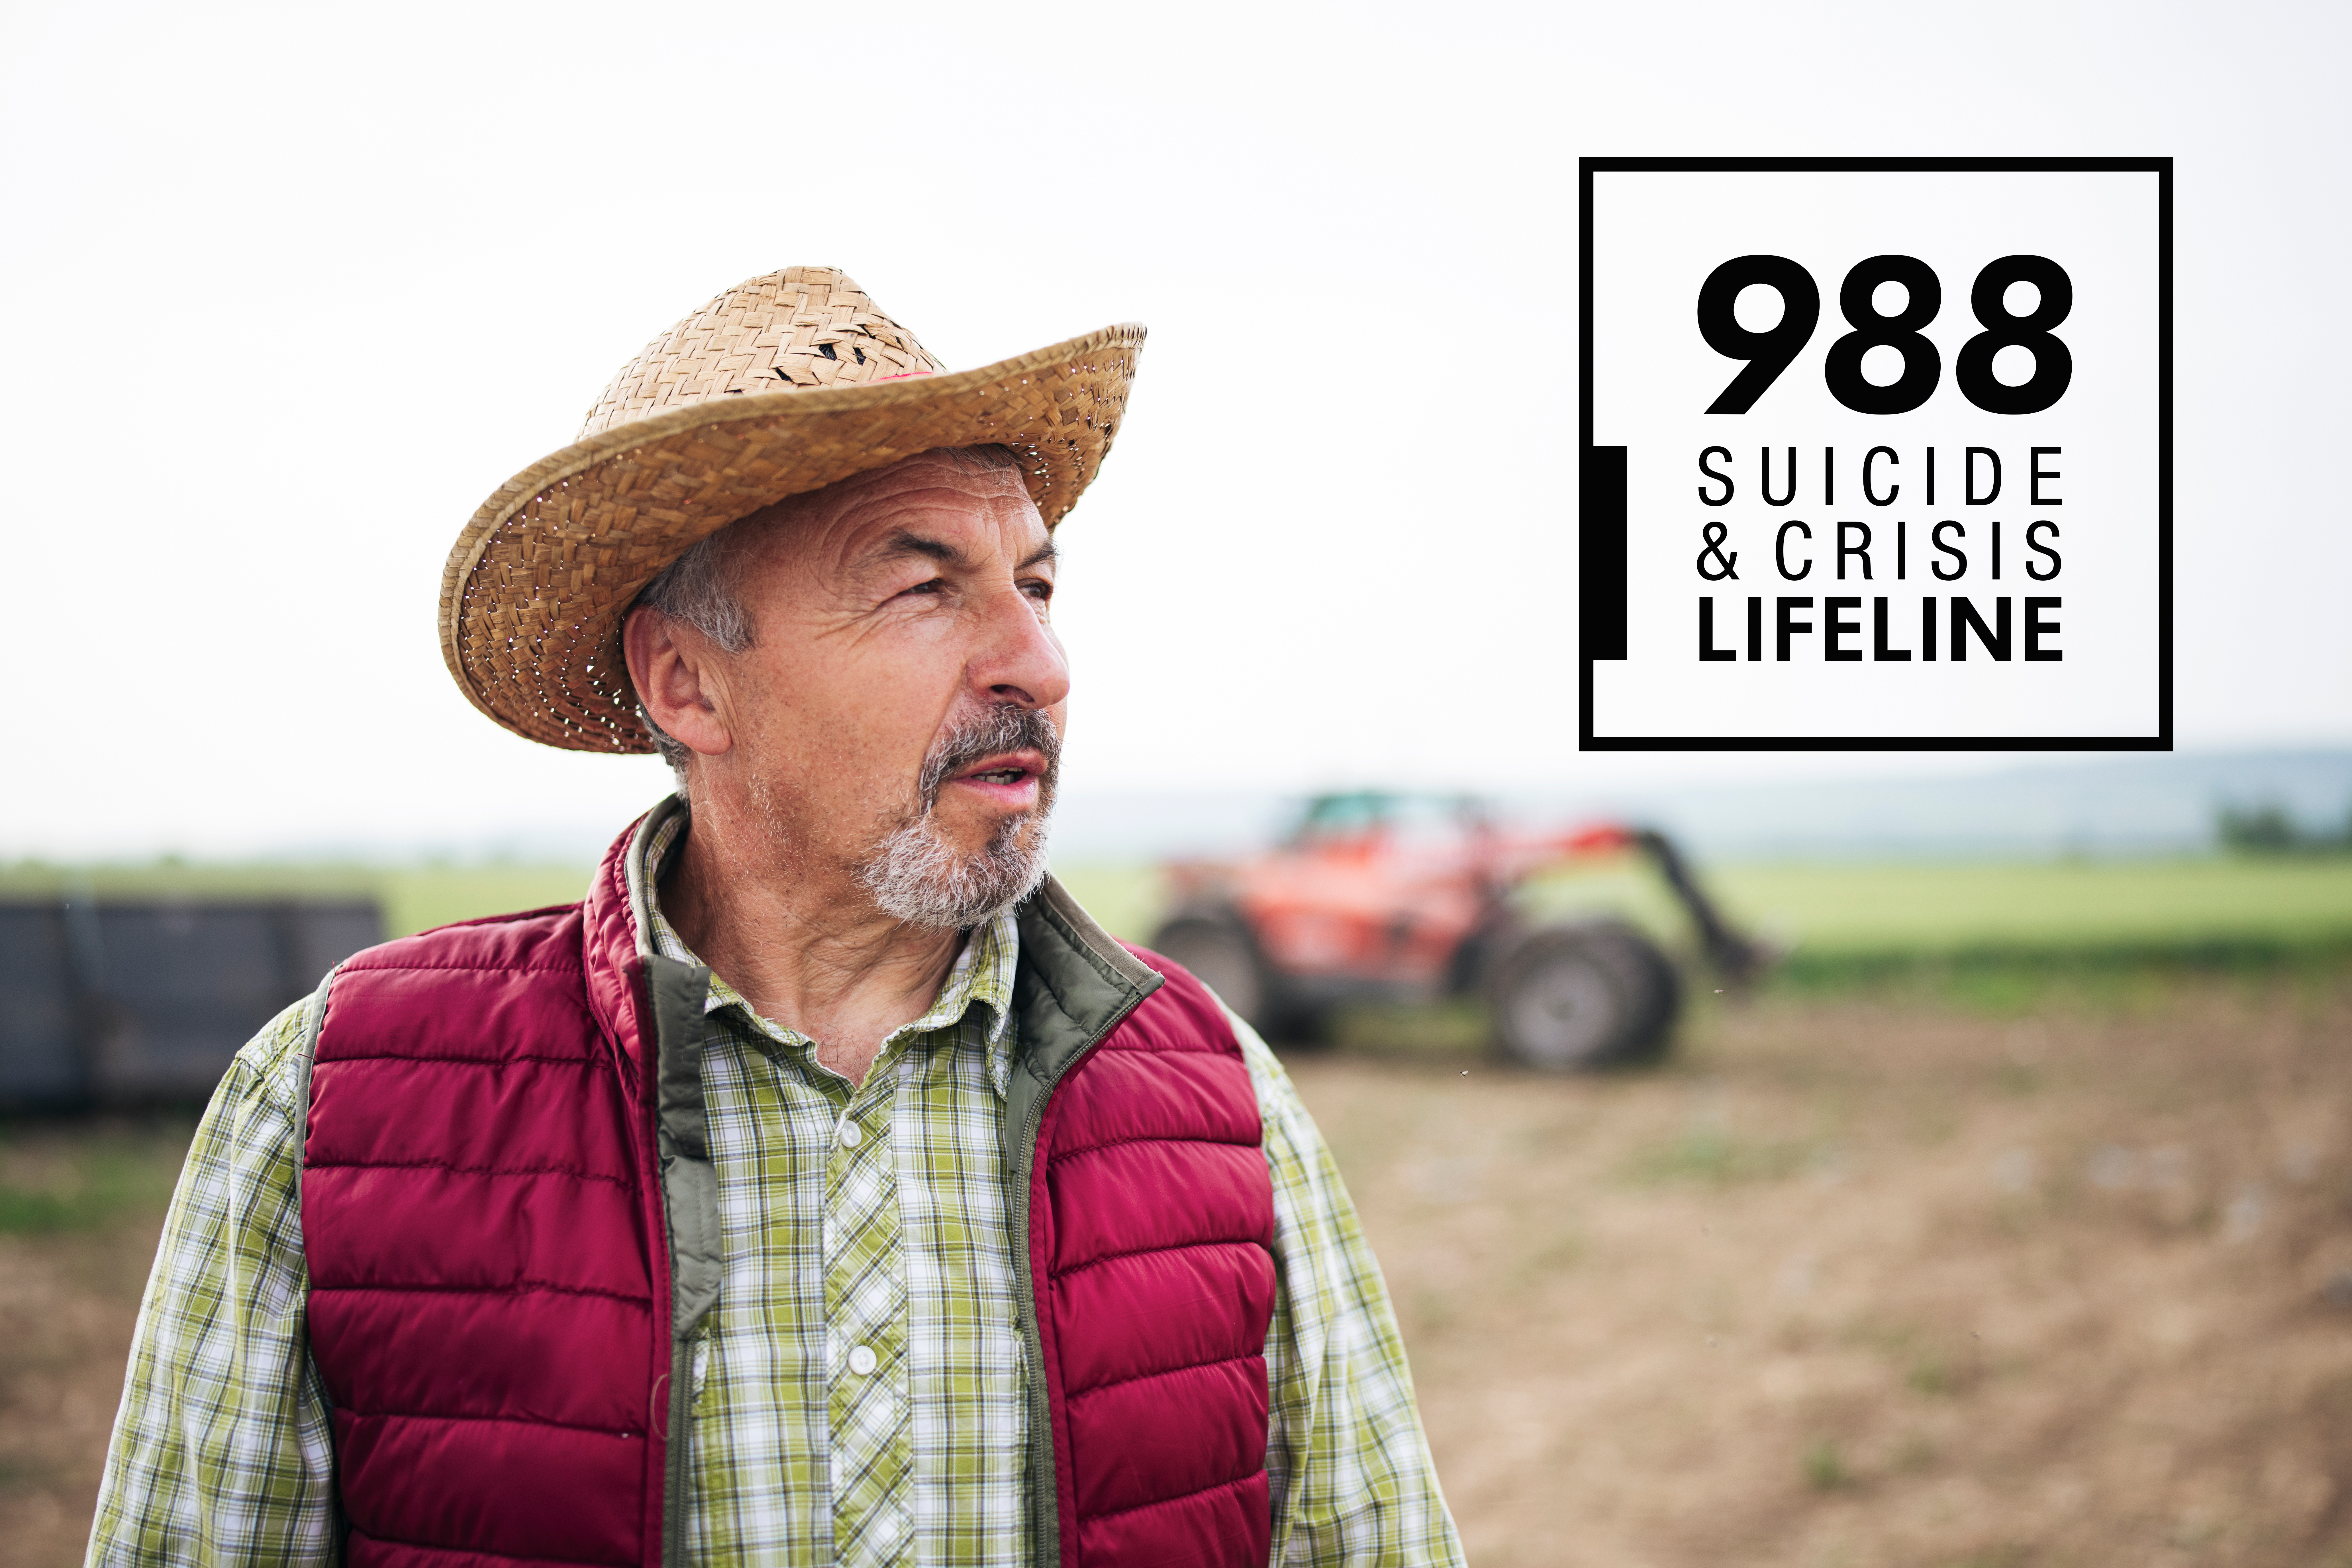 Graphic depicting a farmer in the field and text that says "988 Suicide and Crisis Lifeline")